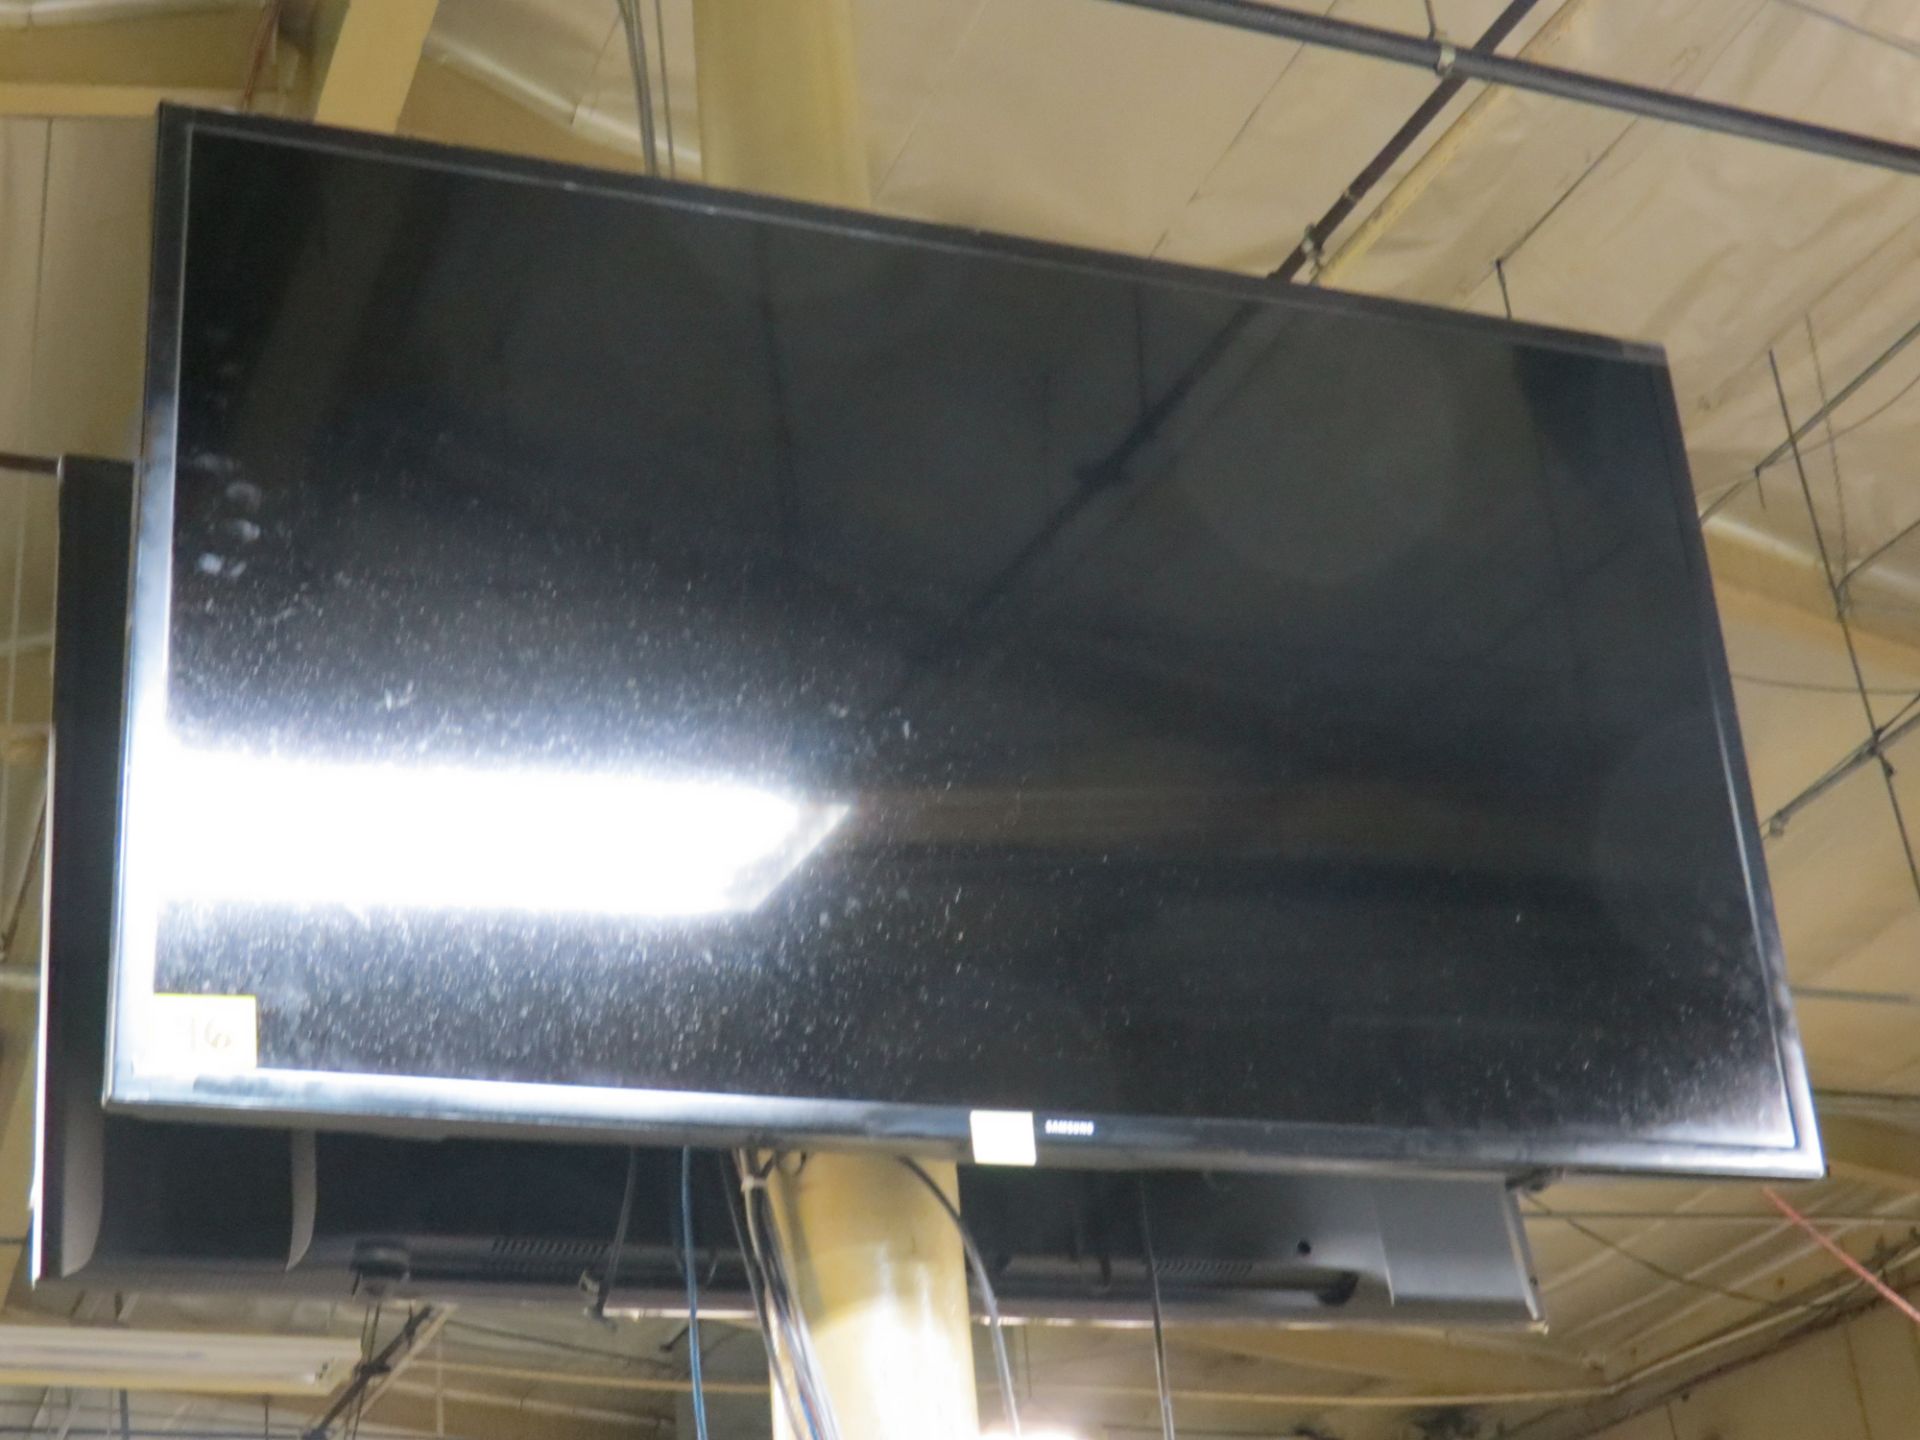 SAMSUNG 65" TV IN WAREHOUSE WITH MOUNT